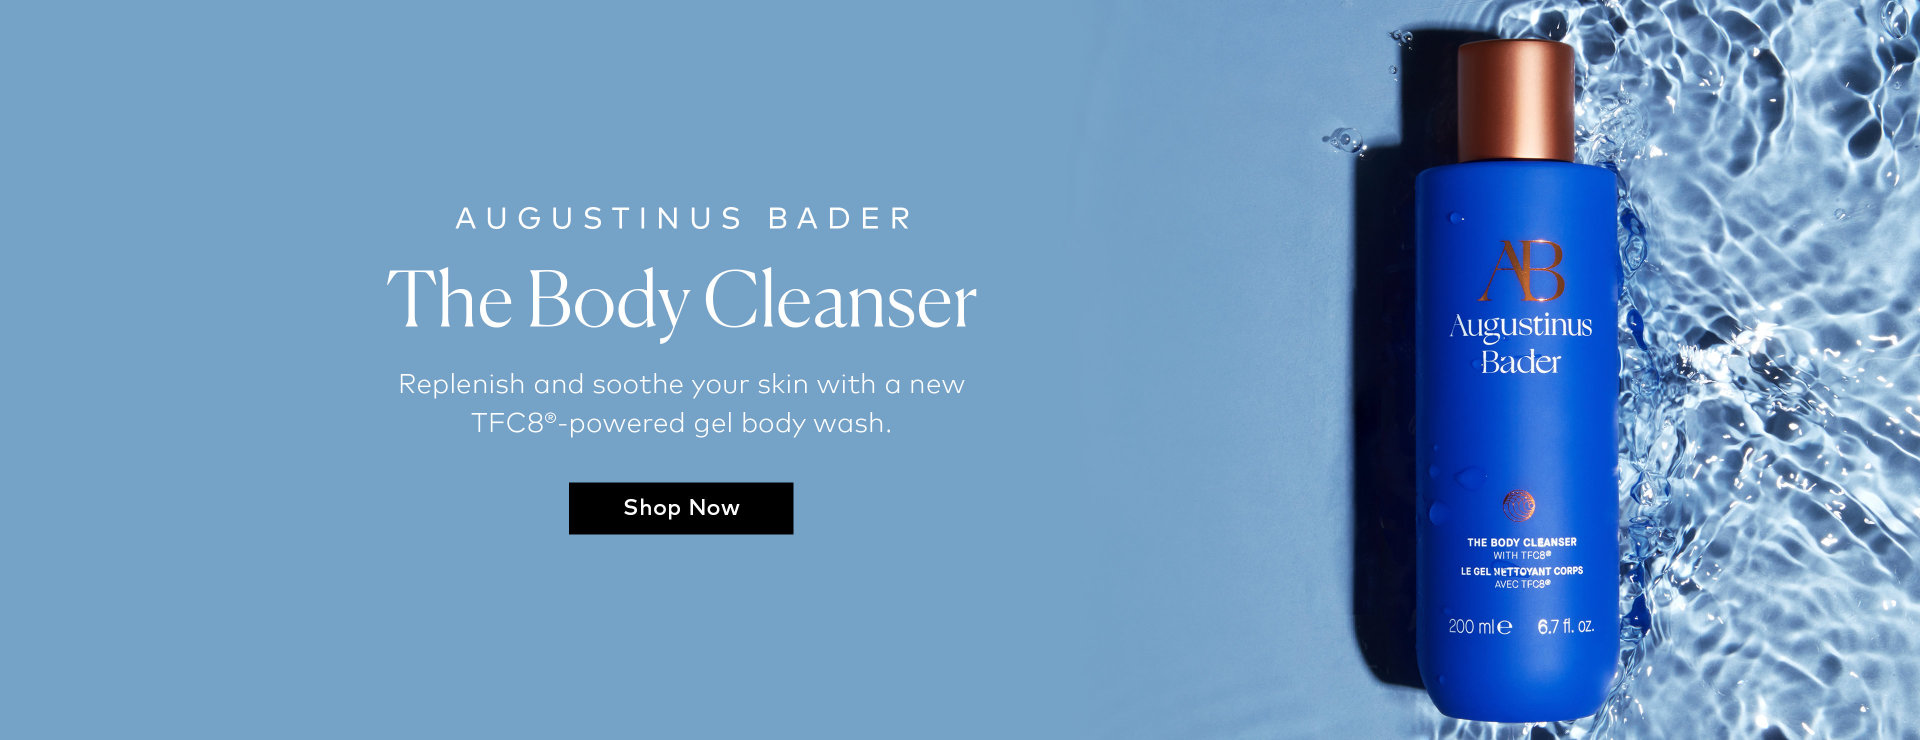 Shop the Augustinus Bader The Body Cleanser on Beautylish.com! 